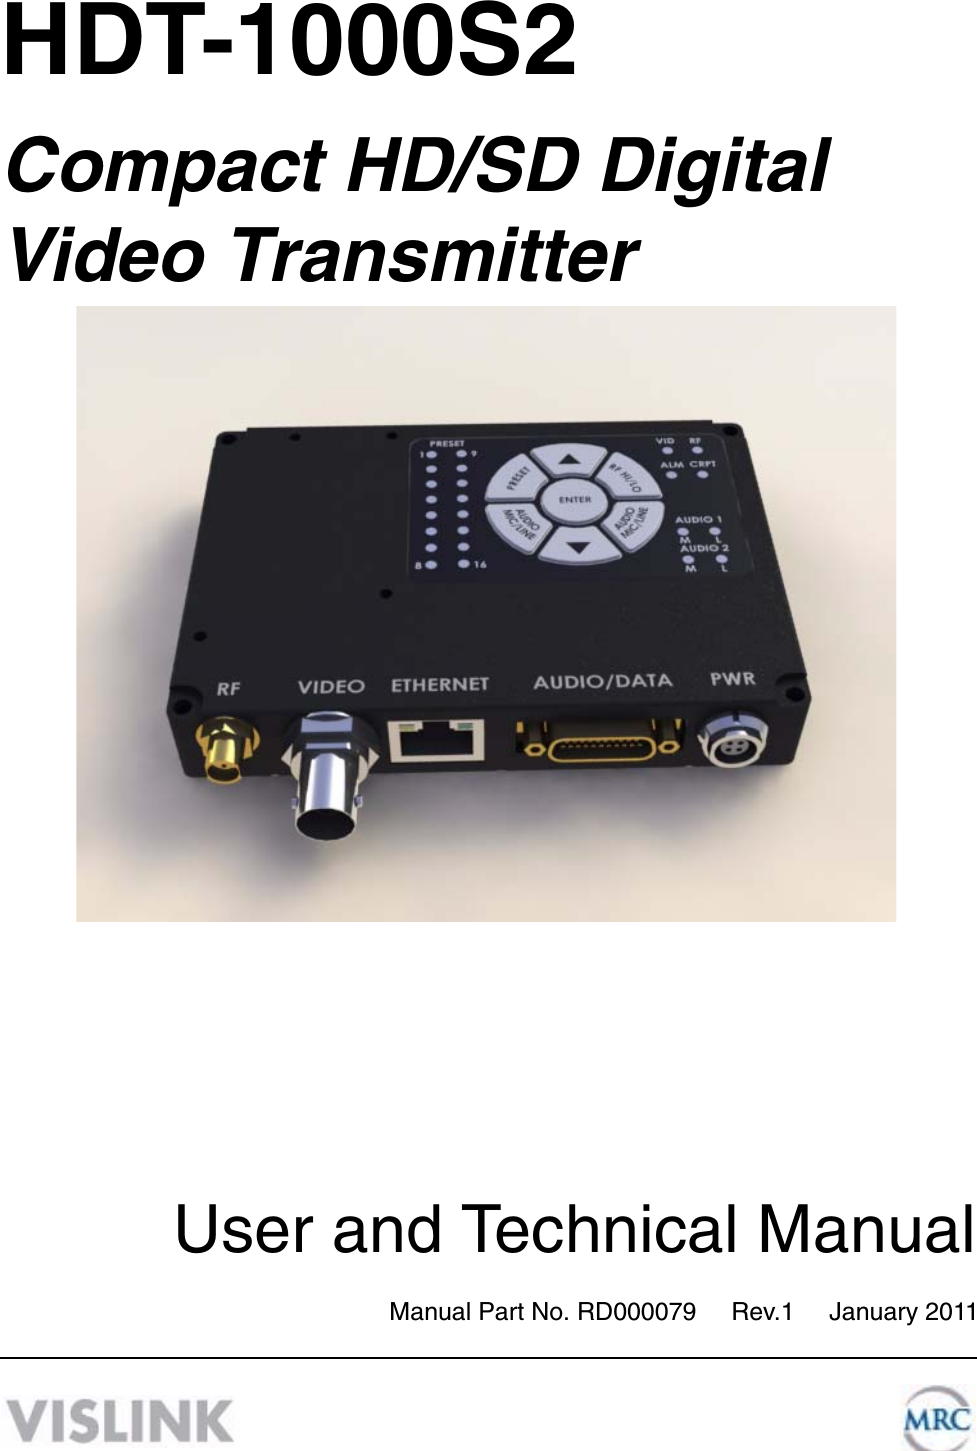 User and Technical ManualPreliminary Draft - April 2010HDT-1000S2Compact HD/SD Digital Video TransmitterManual Part No. RD000079     Rev.1     January 2011